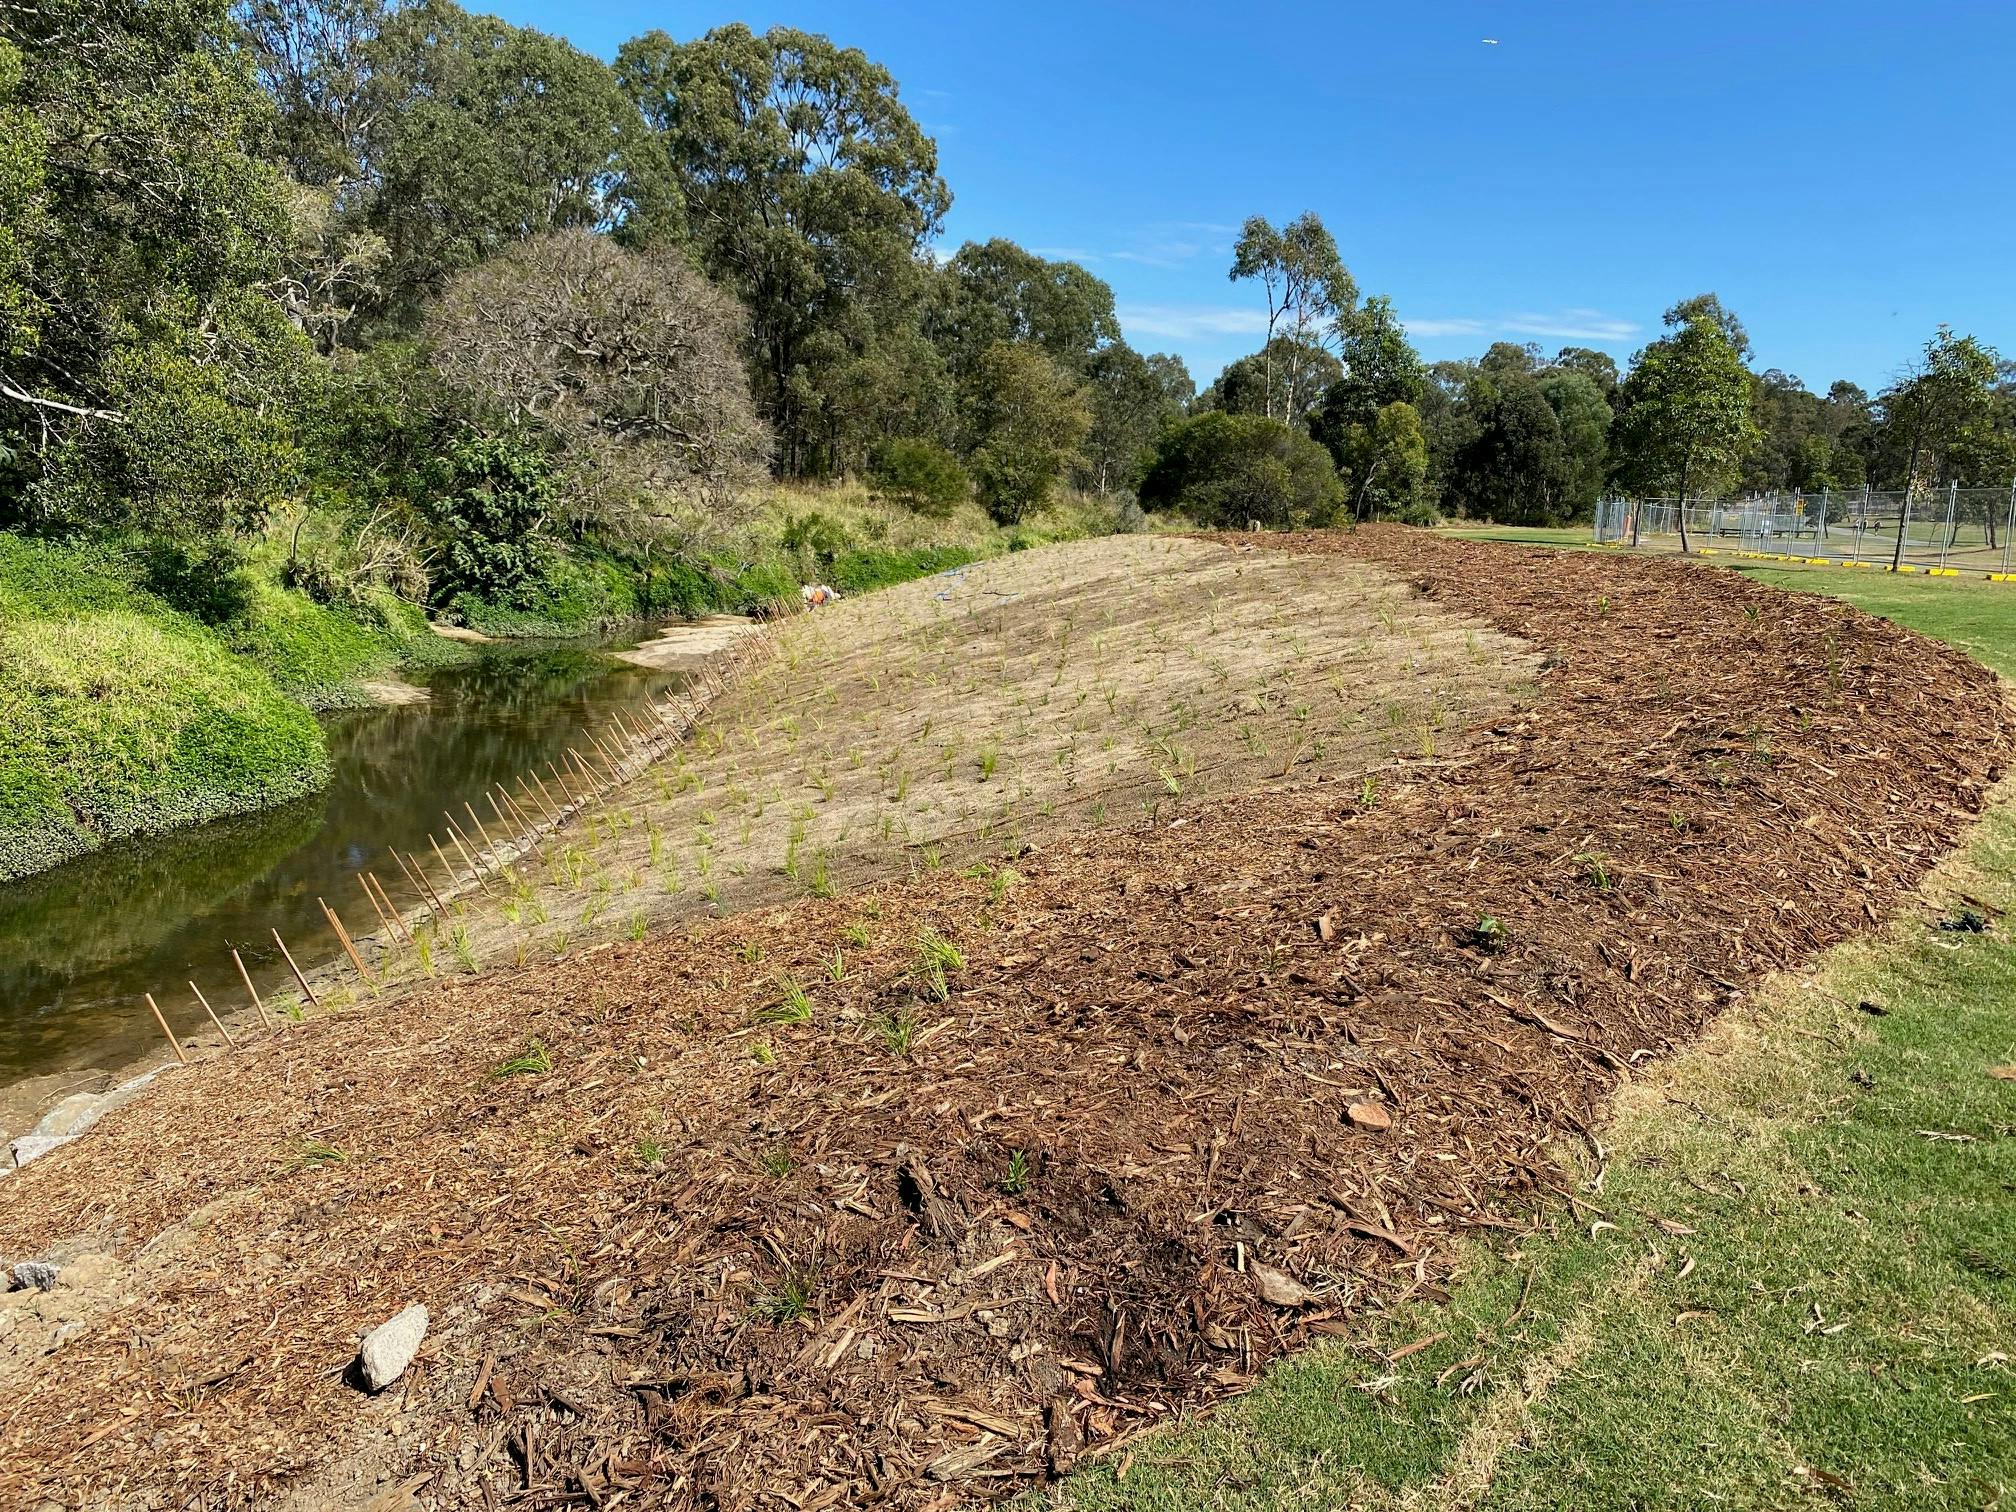 Downfall Creek - another example of rehabilitation works on part of the creek bank